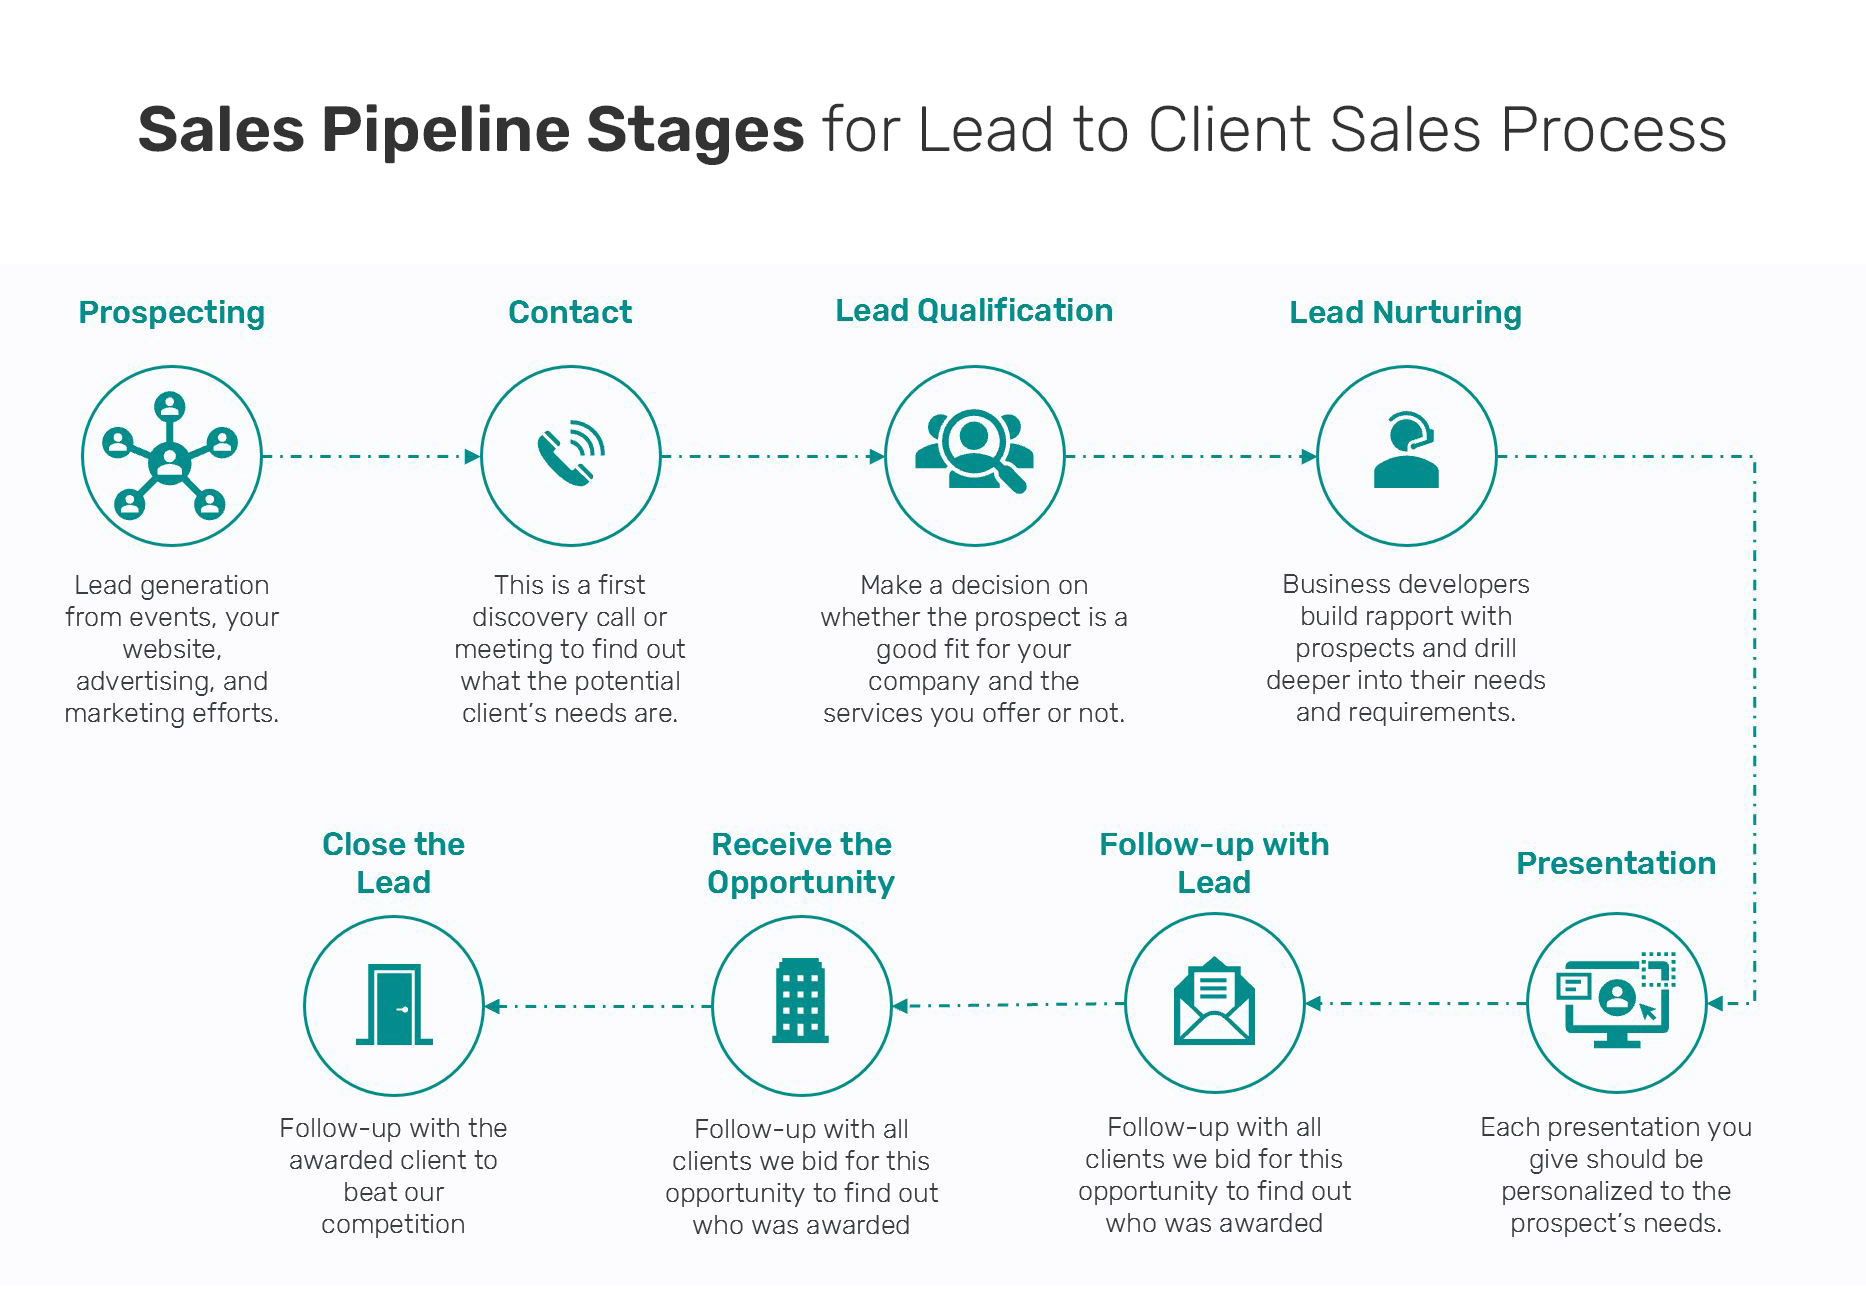 Sales Pipeline Stages for Lead to Client Sales Process